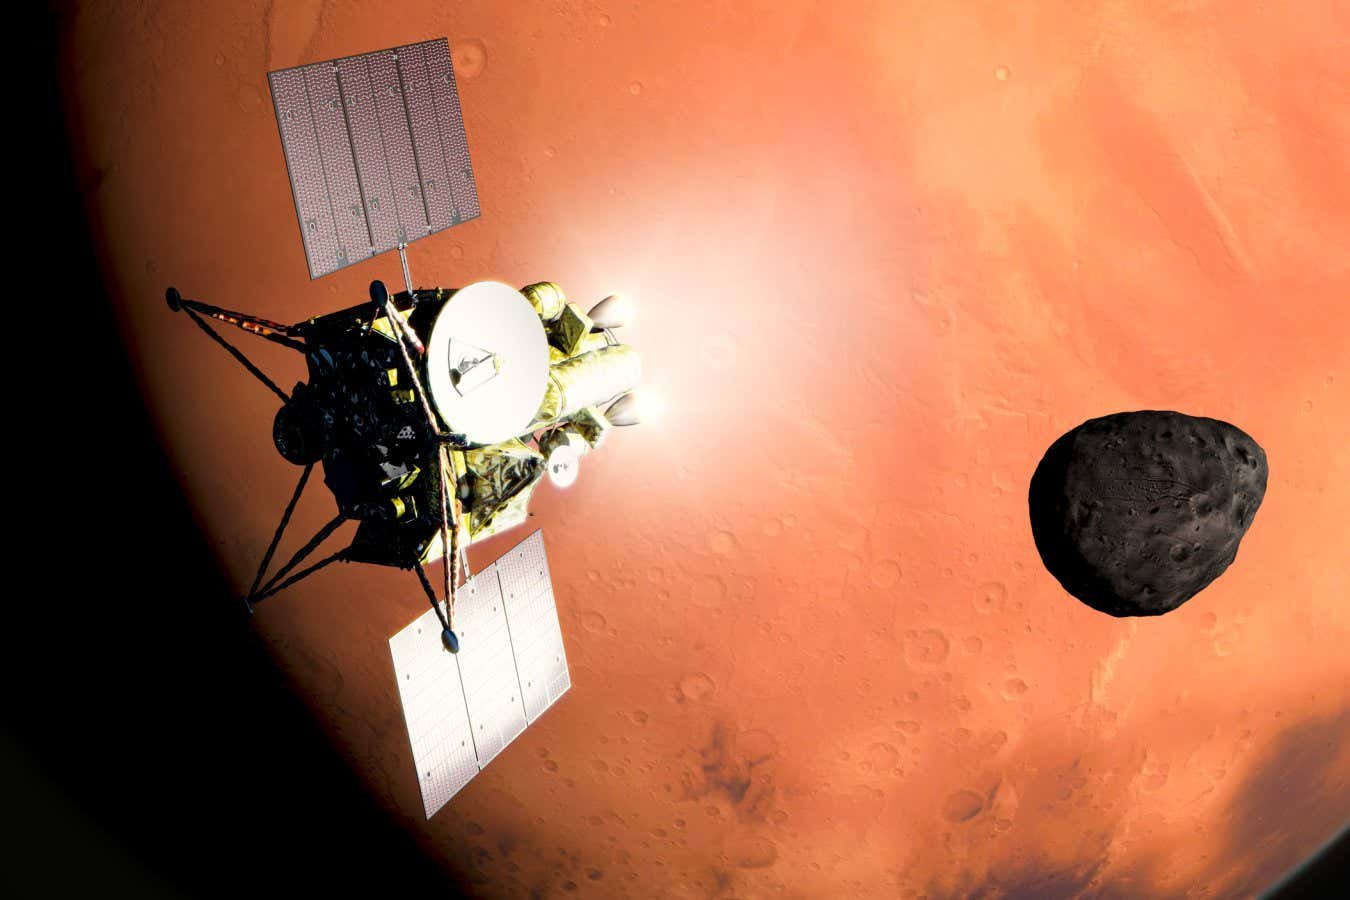 Japan is sending a rover to Mars's moon Phobos in 2024